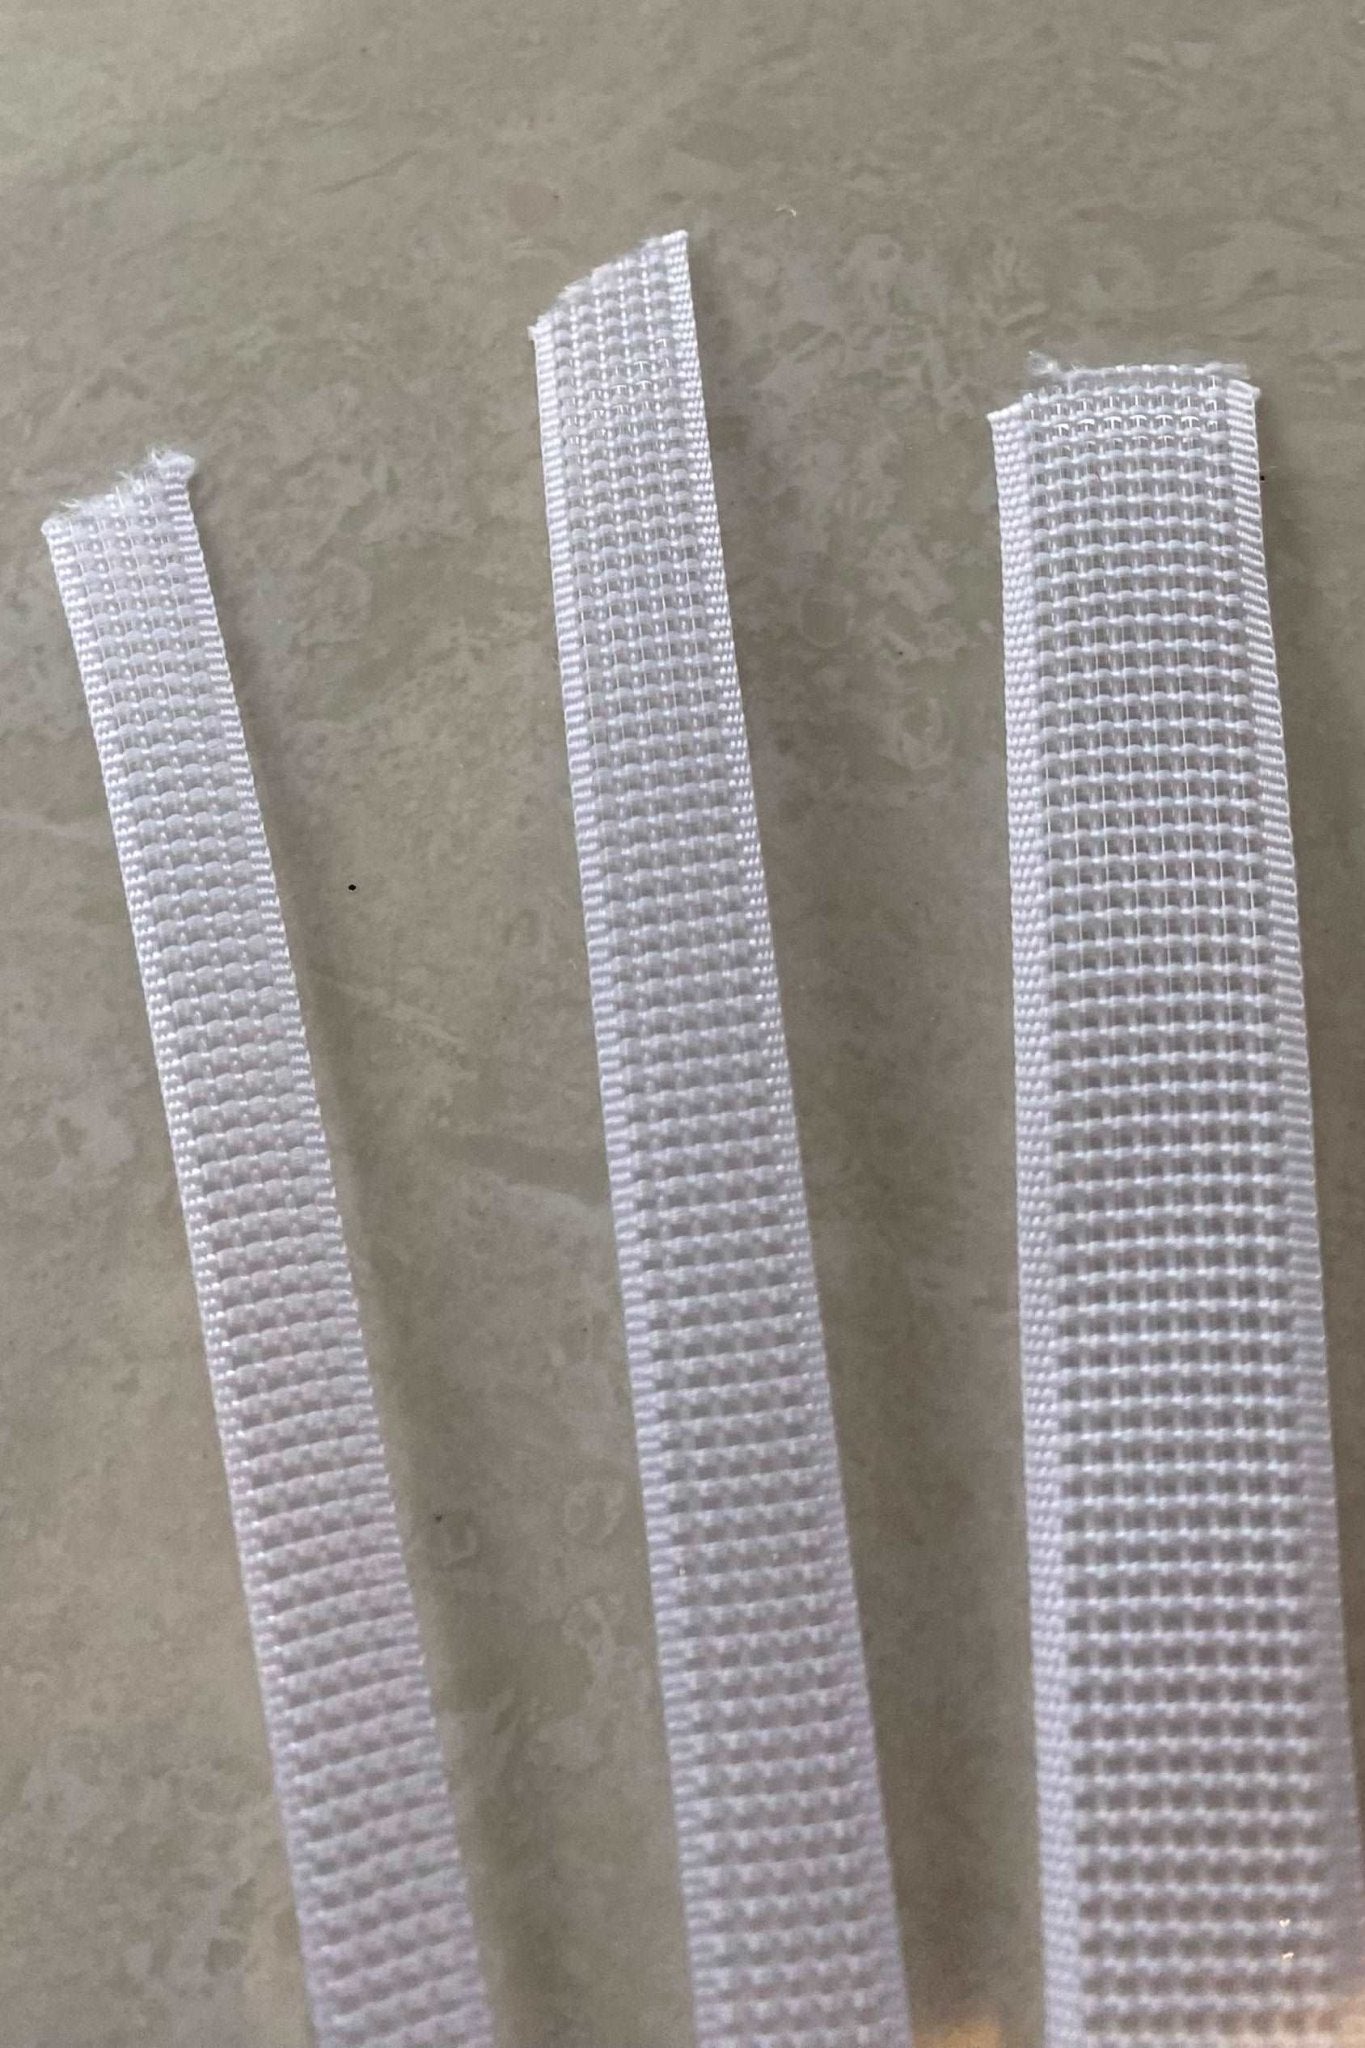 Sew in Boning White - 6mm, 8mm, 12mm - The Stitch Parlour - The Stitch Parlour